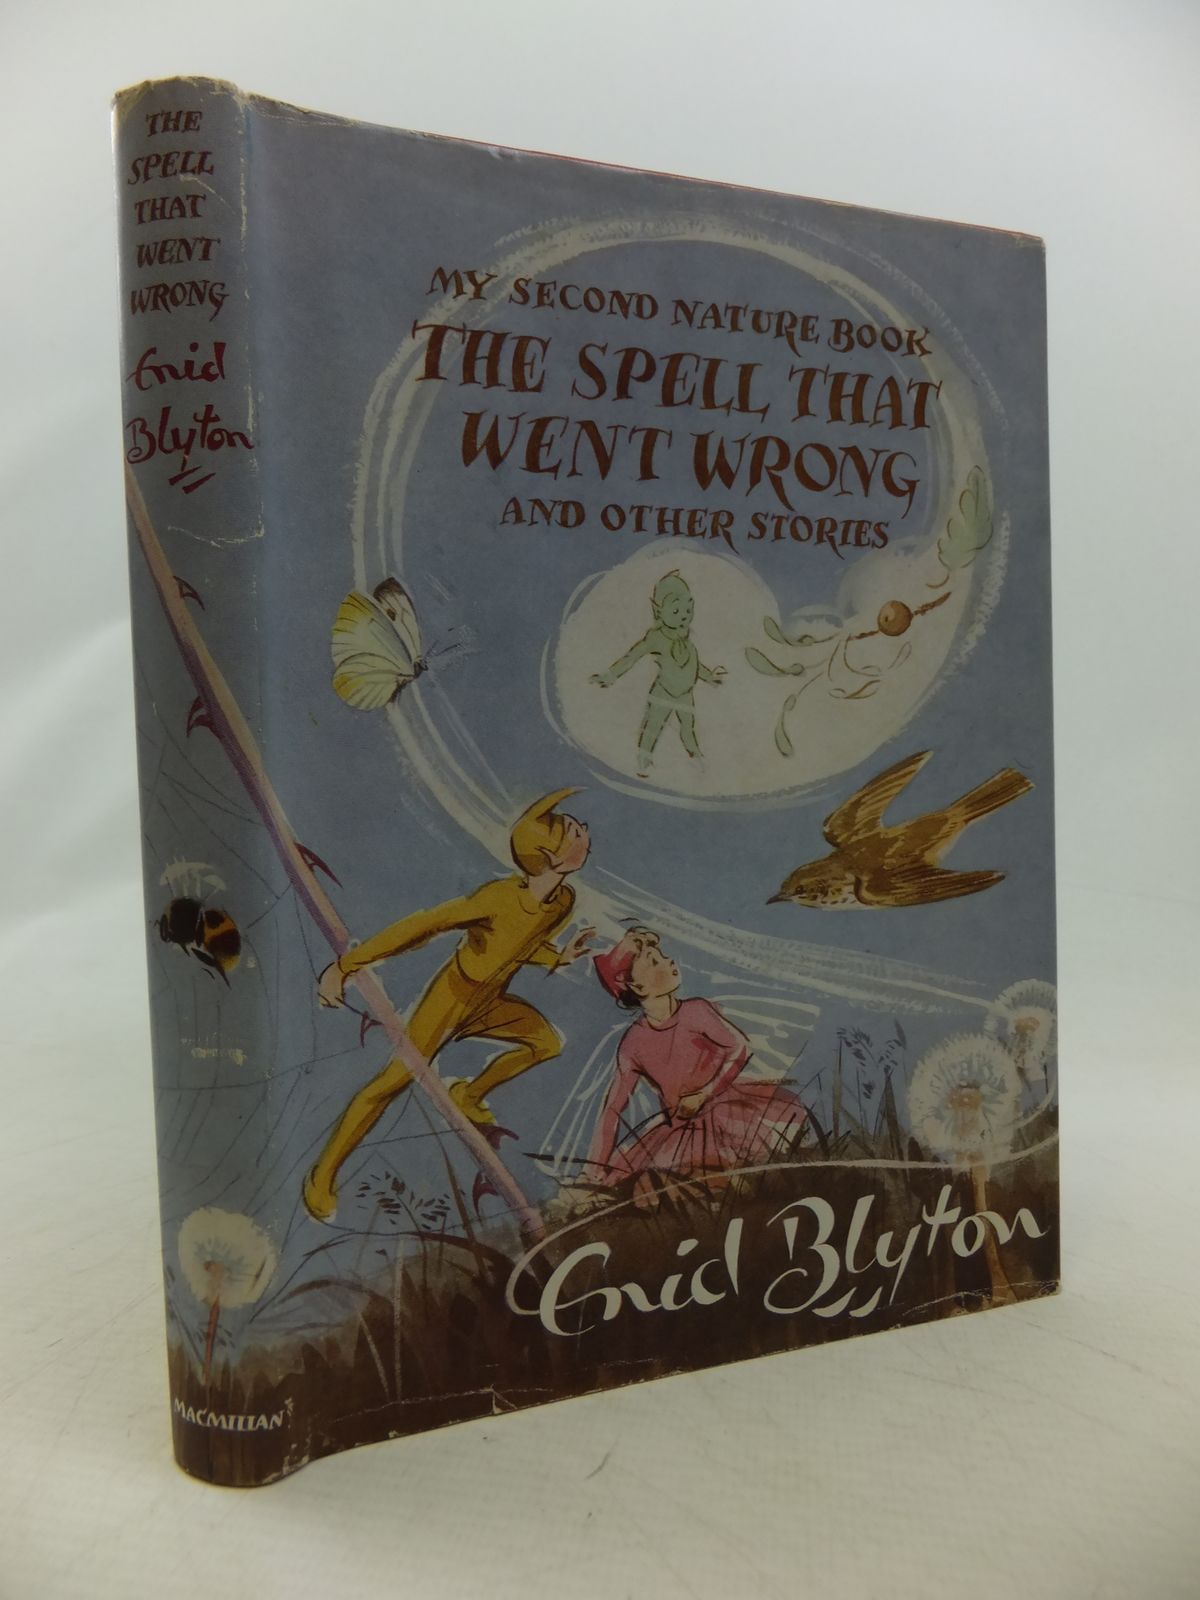 Cover of MY SECOND NATURE BOOK THE SPELL THAT WENT WRONG AND OTHER STORIES by Enid Blyton